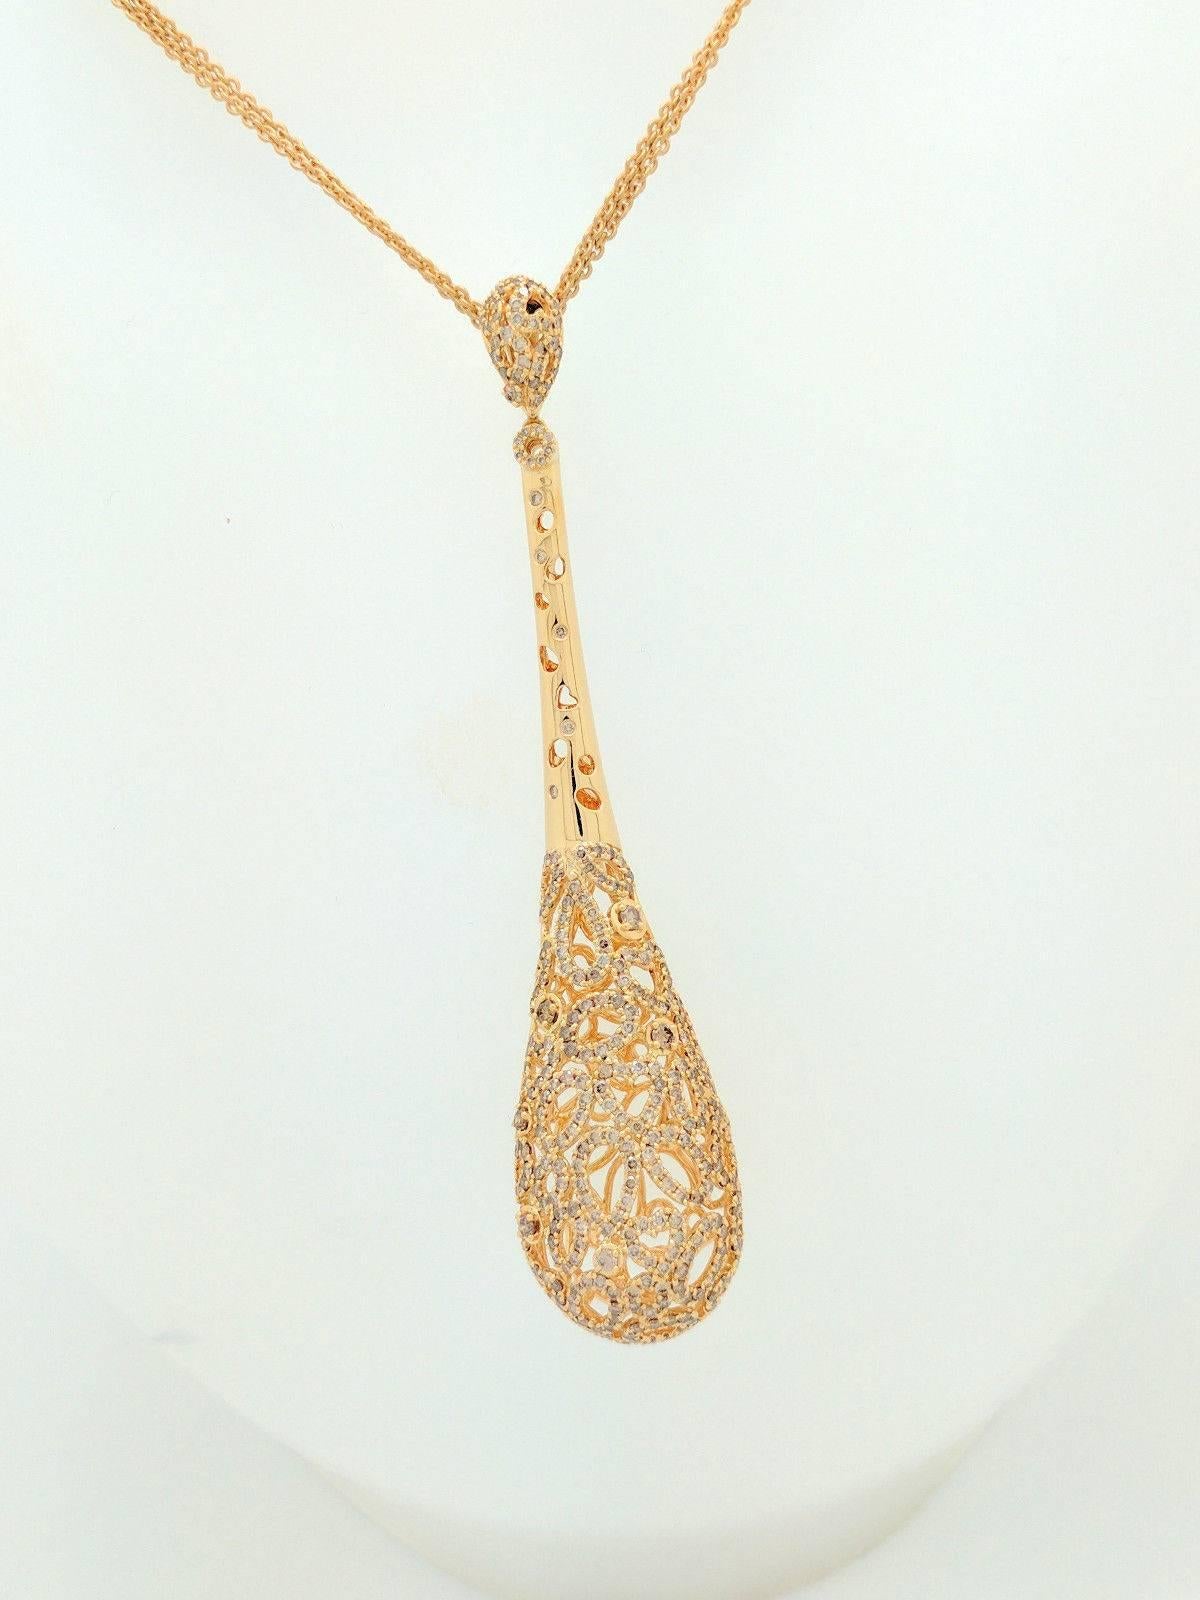 You are viewing an Exquisite Roberto Coin Champagne Diamond Teardrop Pendant Multi-Strand Station Necklace from their Mauresque Collection.

The piece is crafted from 18k yellow gold and weighs 35.3 grams. It features approximately 358 natural round